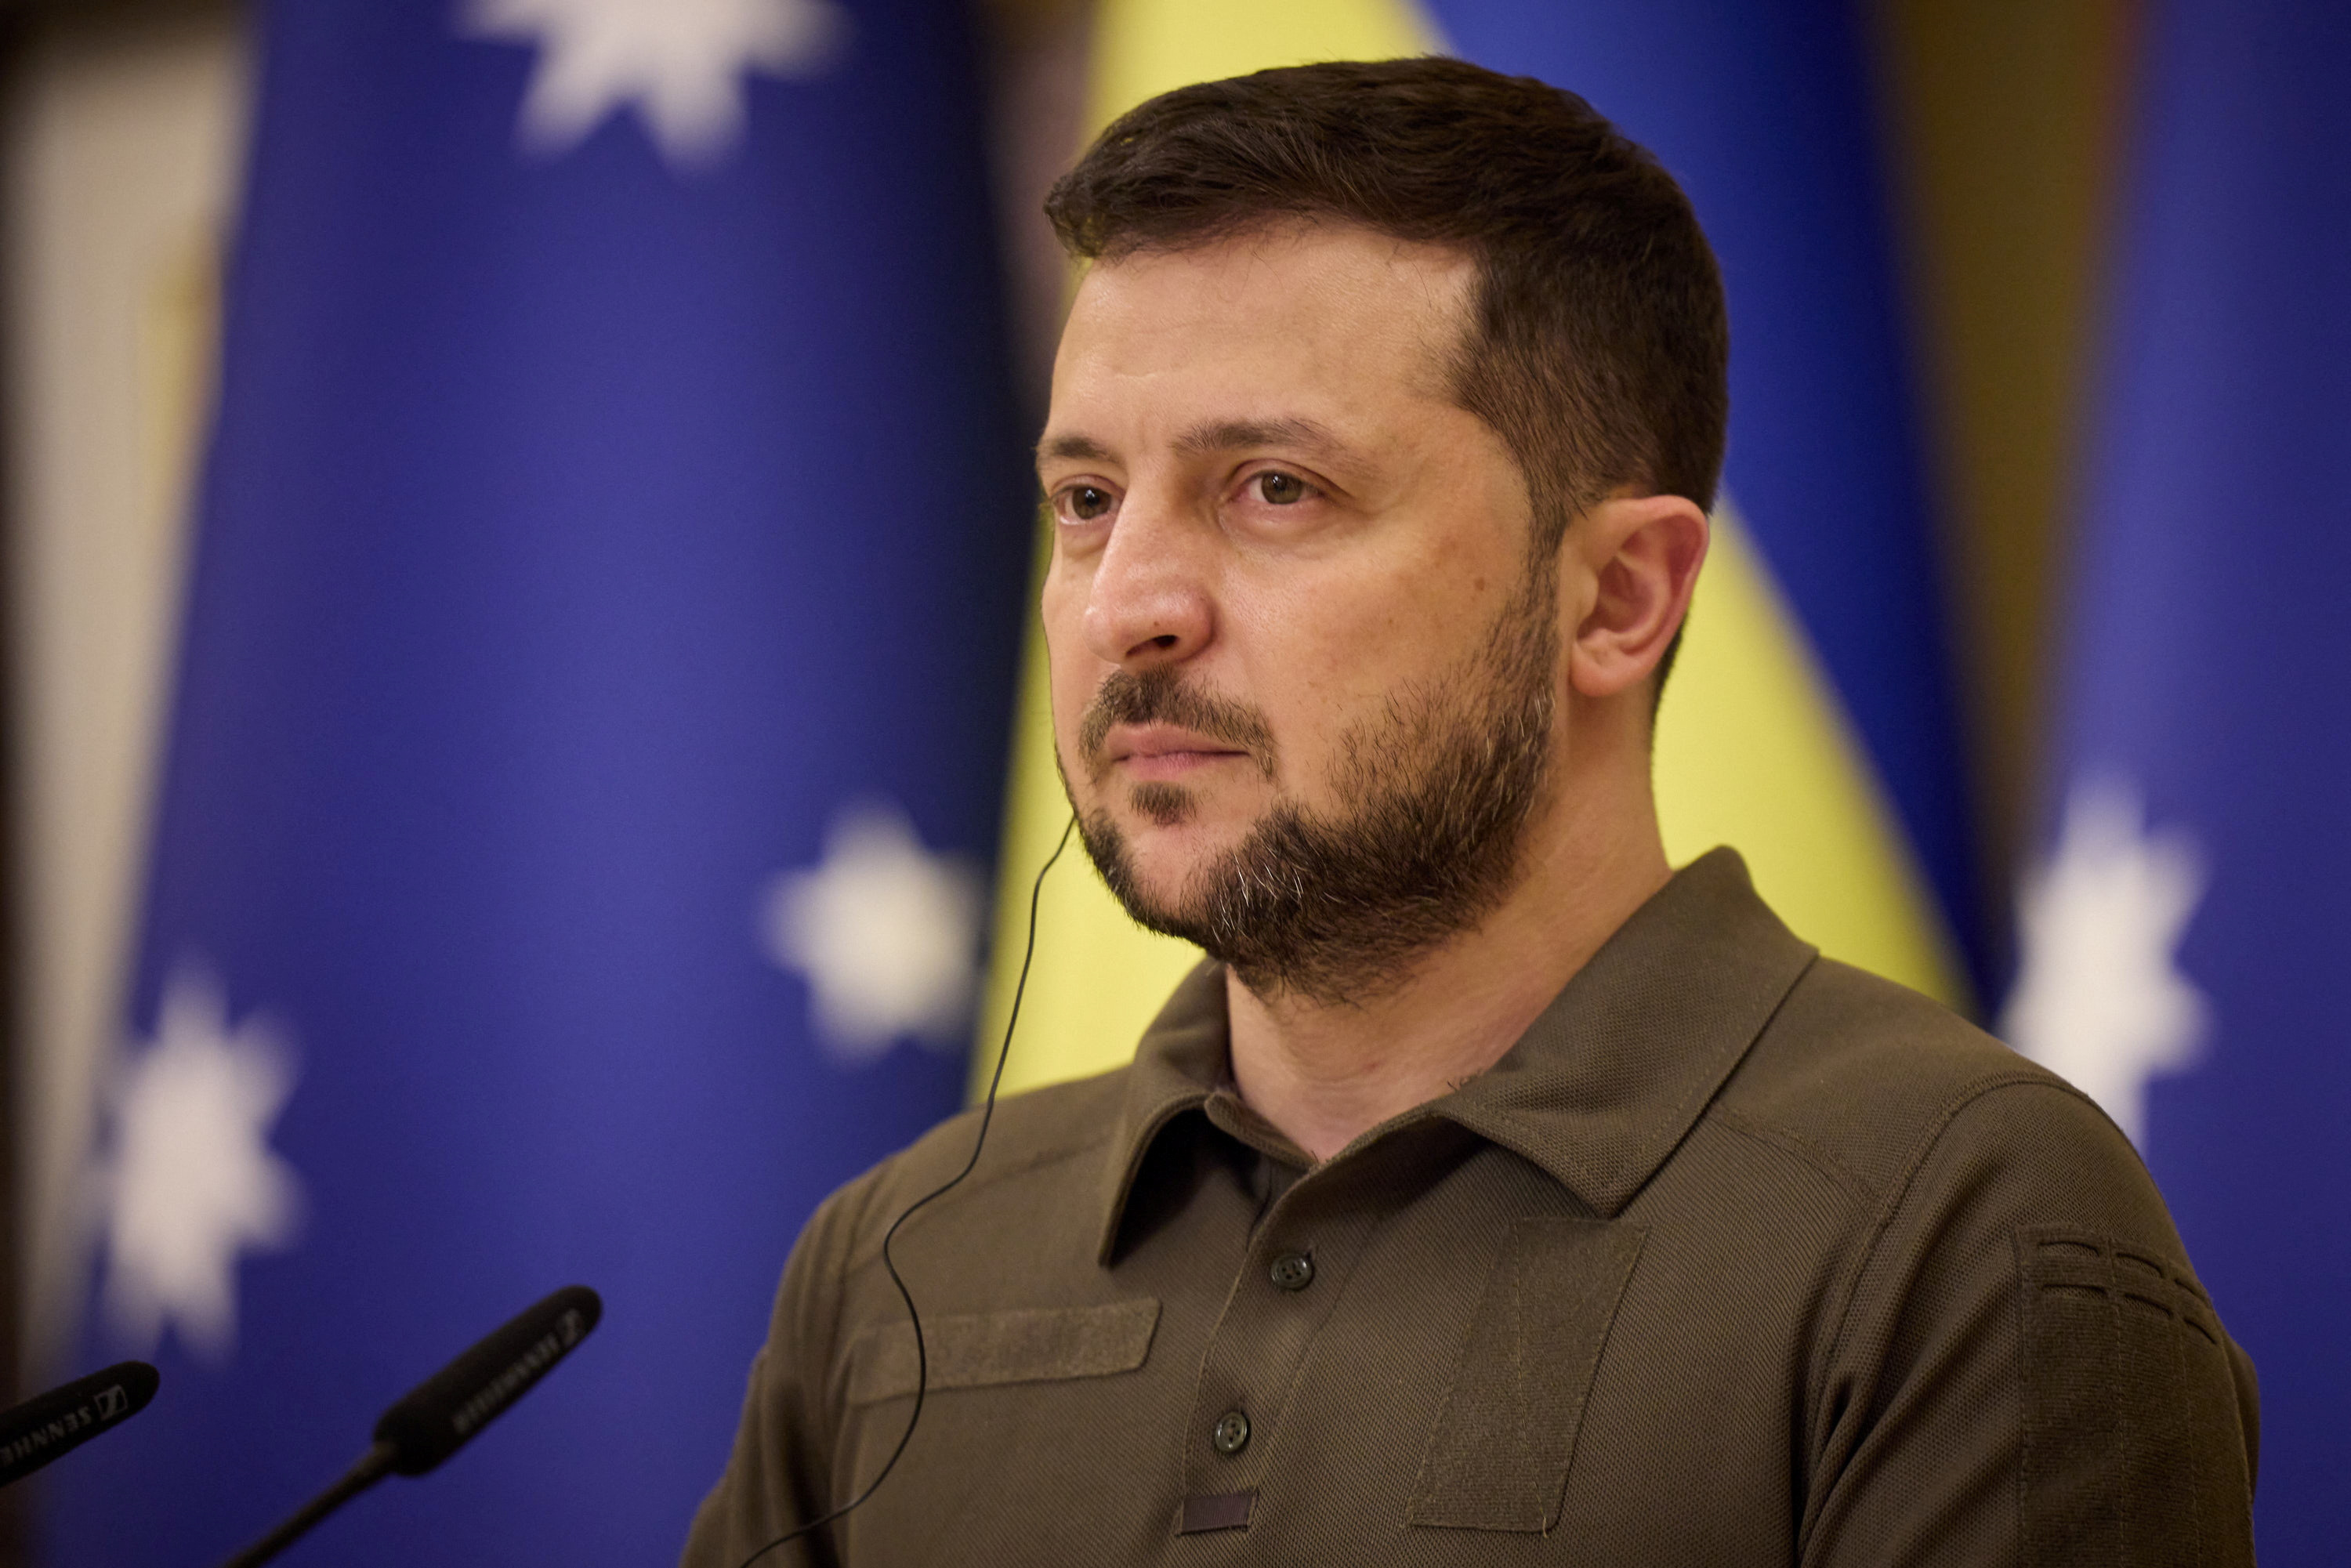 Ukrainian President Zelenskiy attends a joint news briefing with Australian Prime Minister Albanese in Kyiv